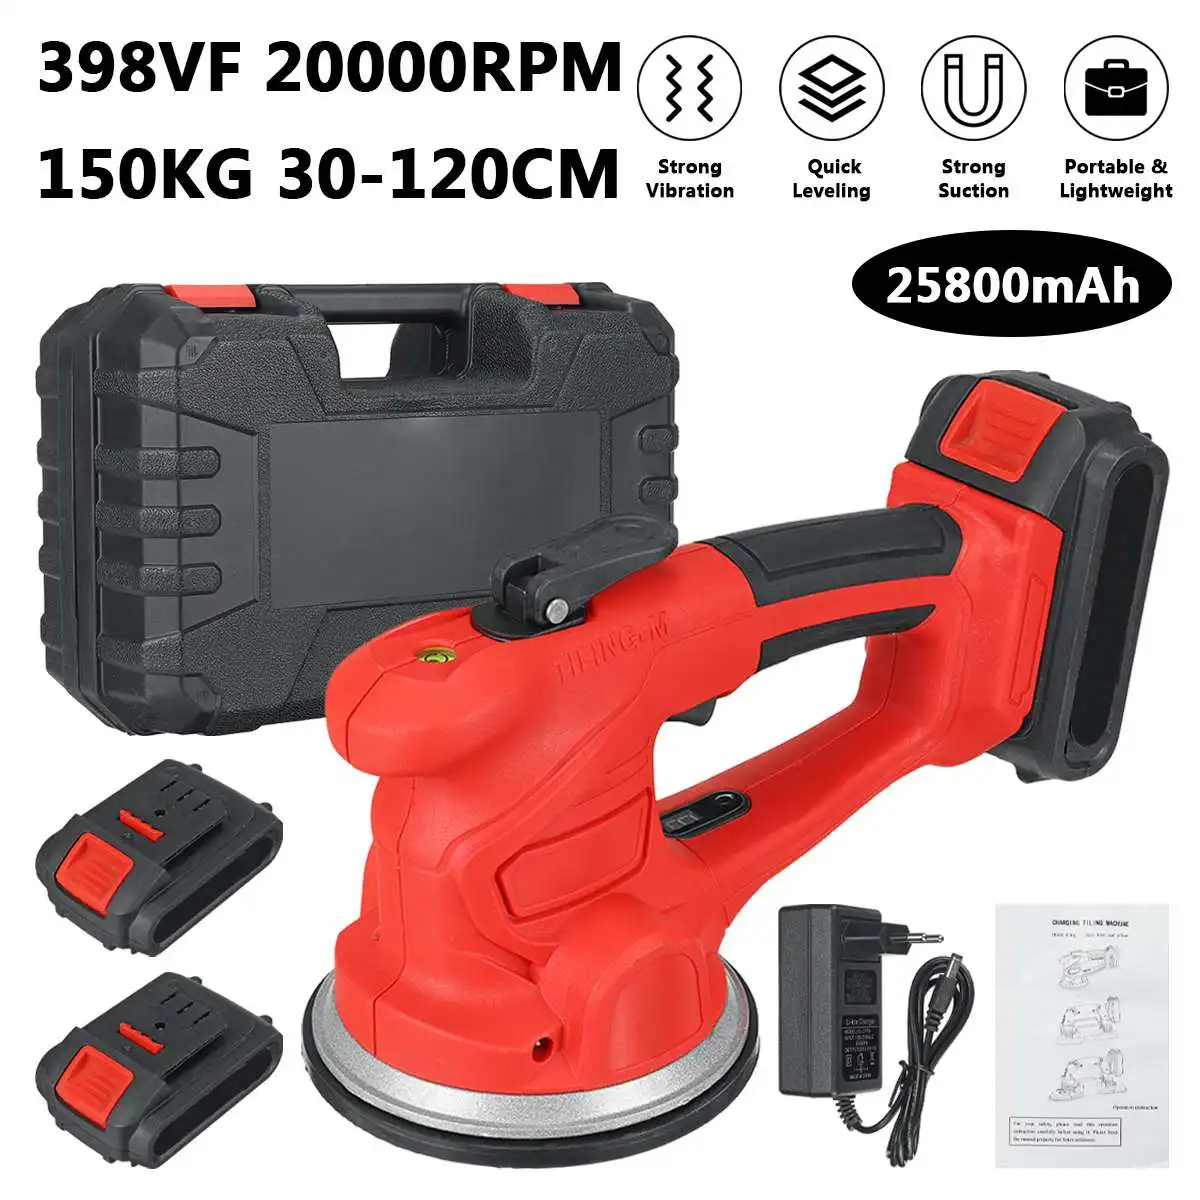 6 Gears Tiles Tiling Machine Electric Tile Vibrator Suction Cup Adjustable Automatic Floor Vibrator Laying Leveling Tool